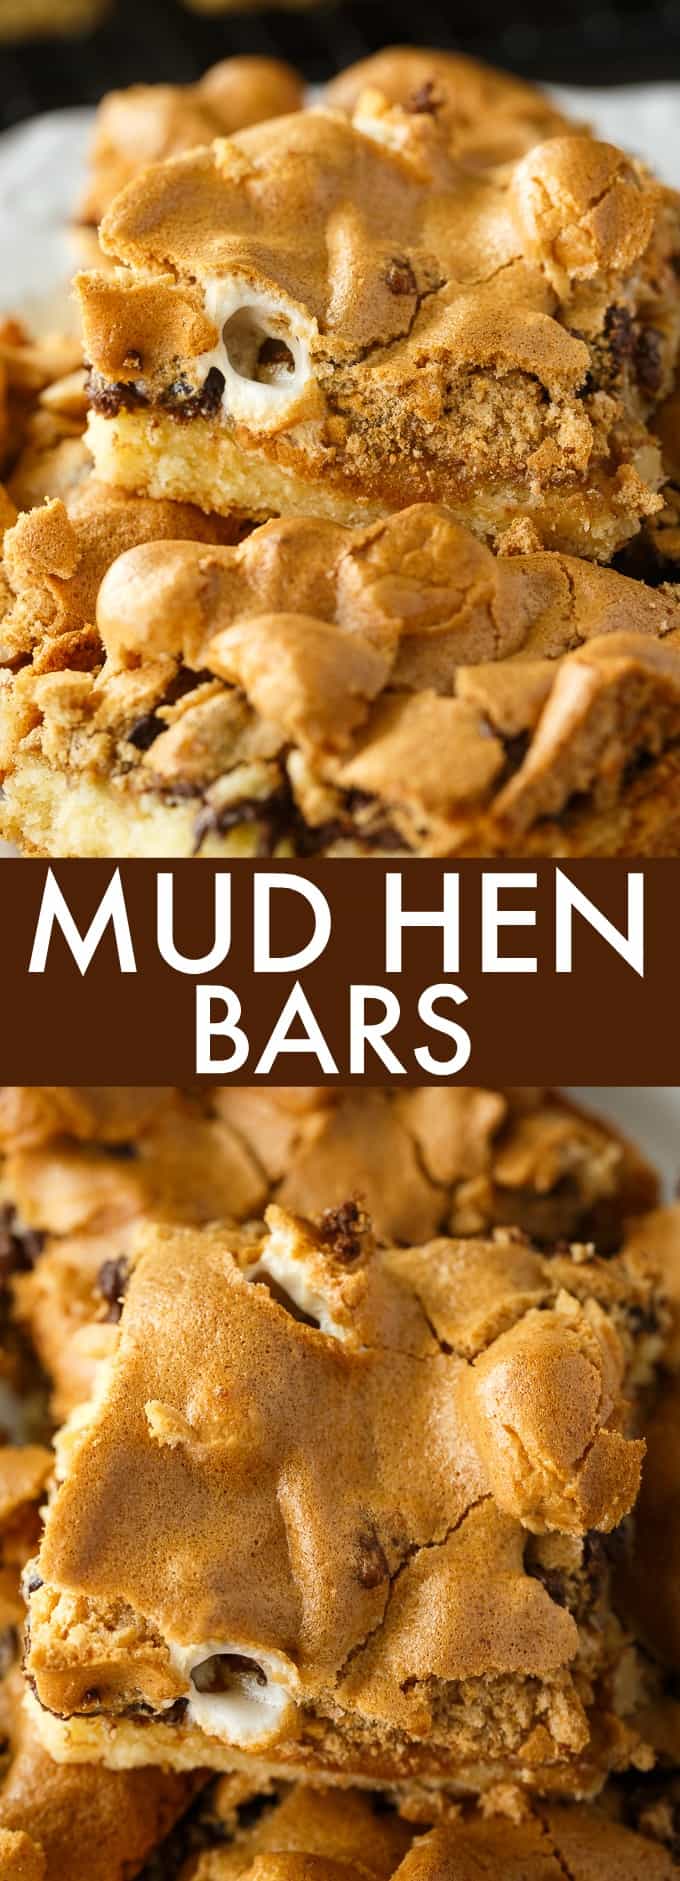 Mud Hen Bars - A vintage dessert from Grandma's cookbook. It has a cookie bar base, topped with a rich layer of walnuts, chocolate and melted marshmallows followed by a sweet brown sugar meringue topping.